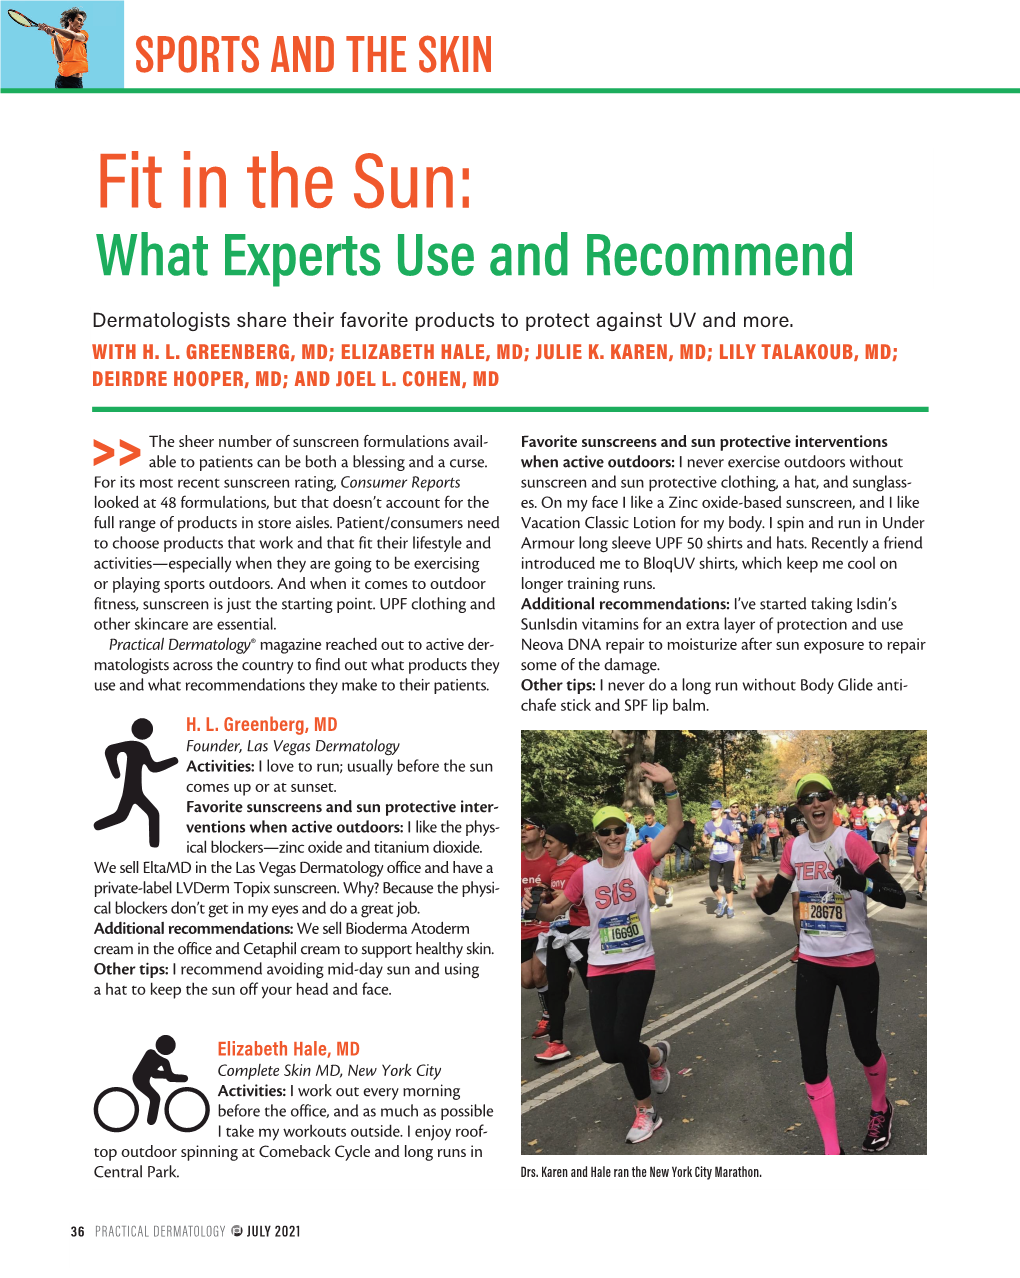 Fit in the Sun: What Experts Use and Recommend